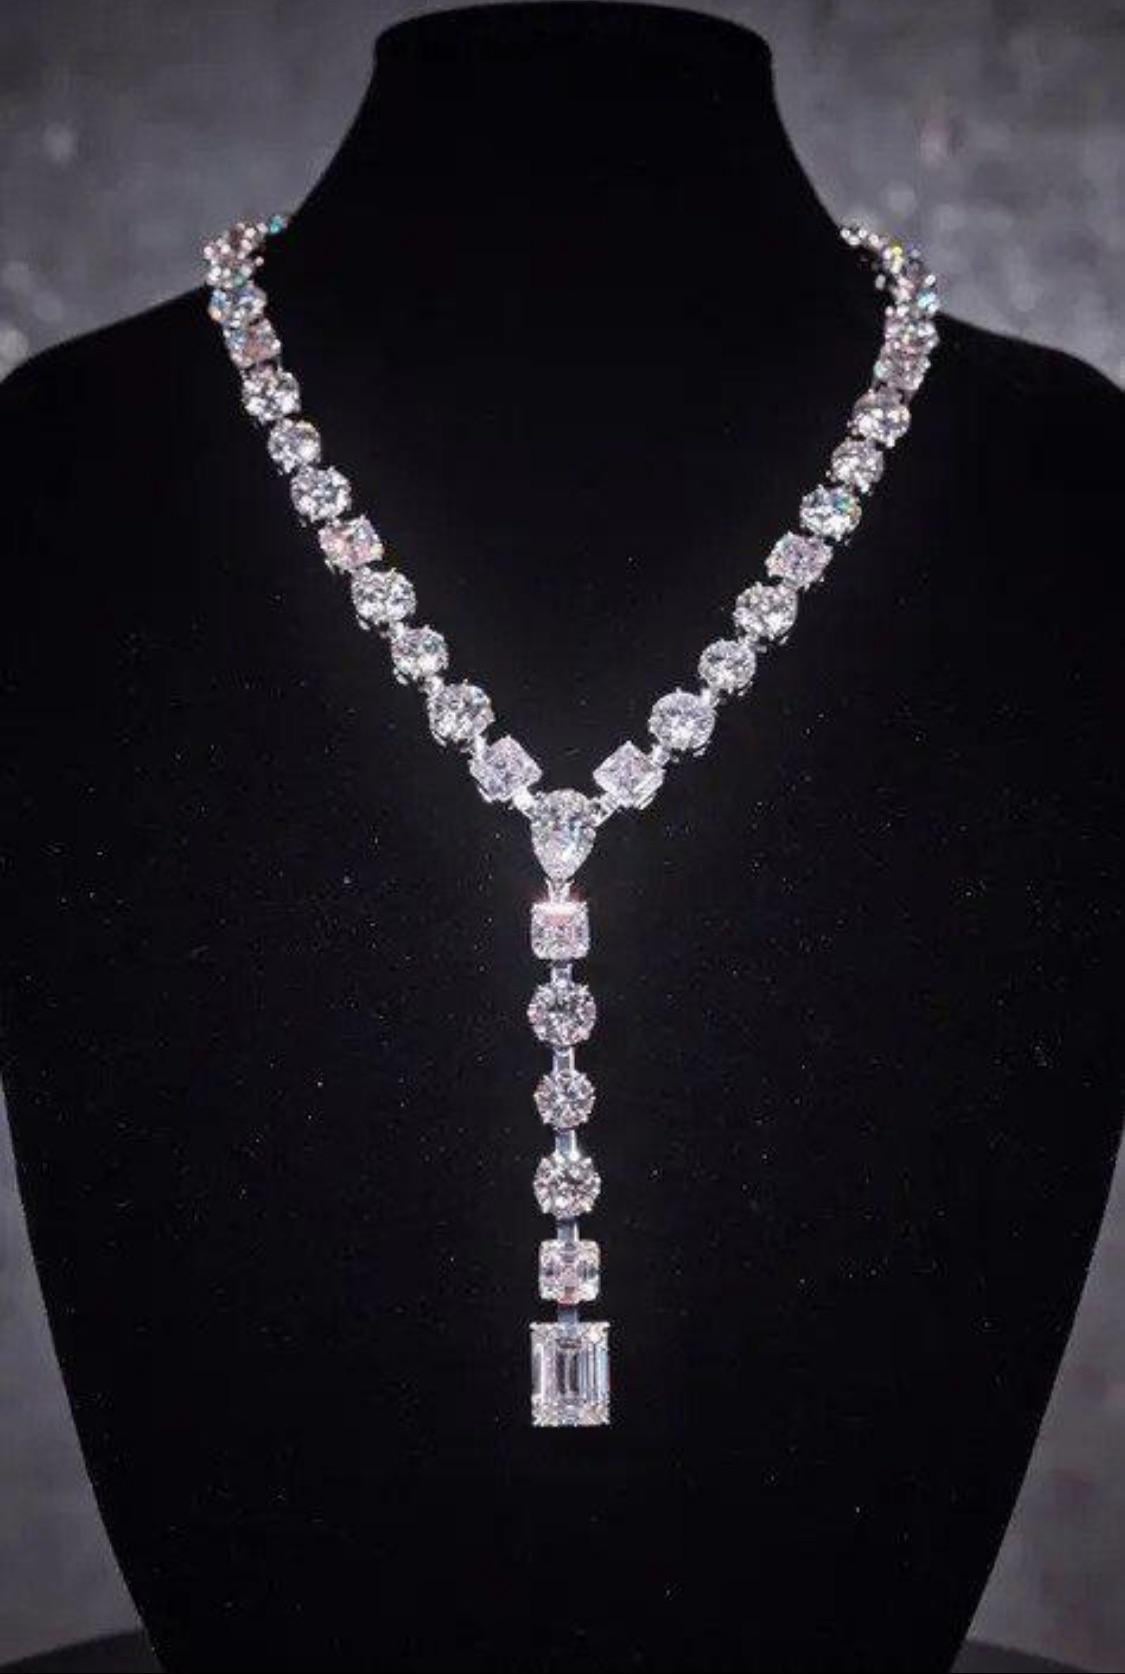 Drake's custom diamond “Previous Engagement” necklace, made of 42 engagement rings to represent the 42 times he thought about proposing to different women but decided against it : r/Fauxmoi